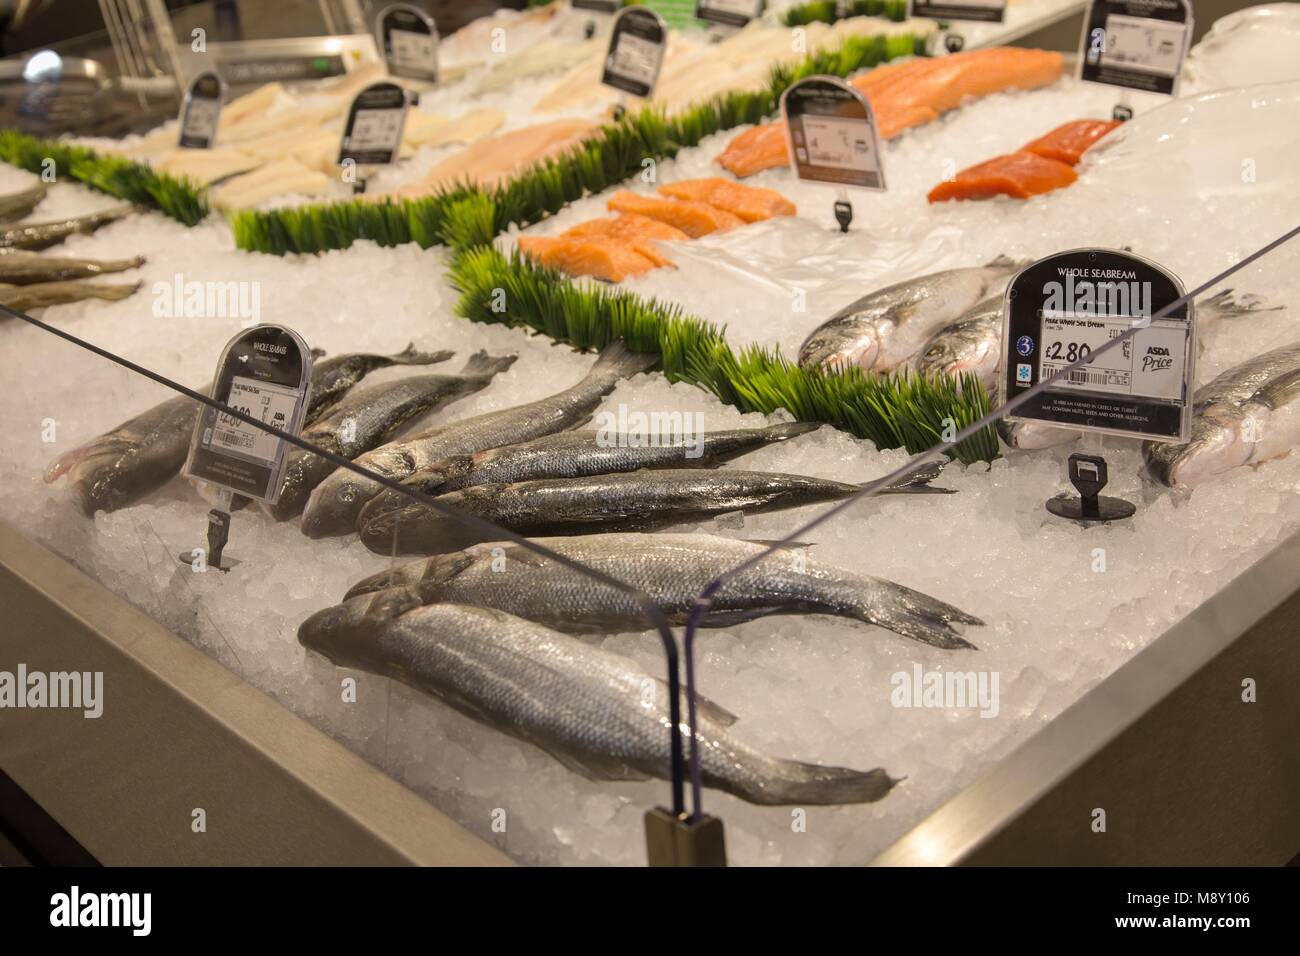 Fresh fish, seabream, on sale in a fishmongers counter at an Asda supermarket. Stock Photo